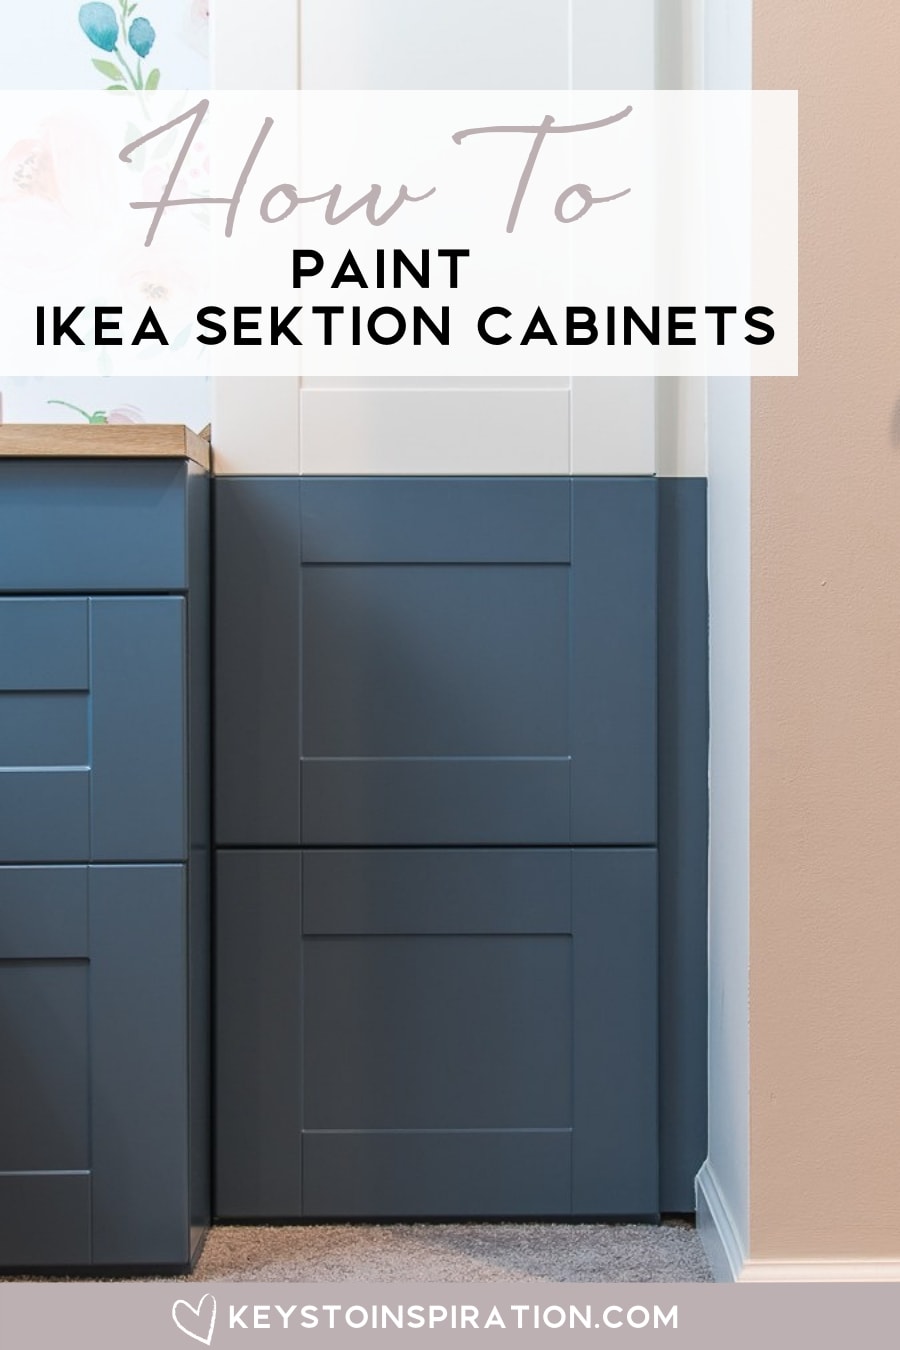 How To Paint Ikea Sektion Cabinets One Room Challenge Week 4